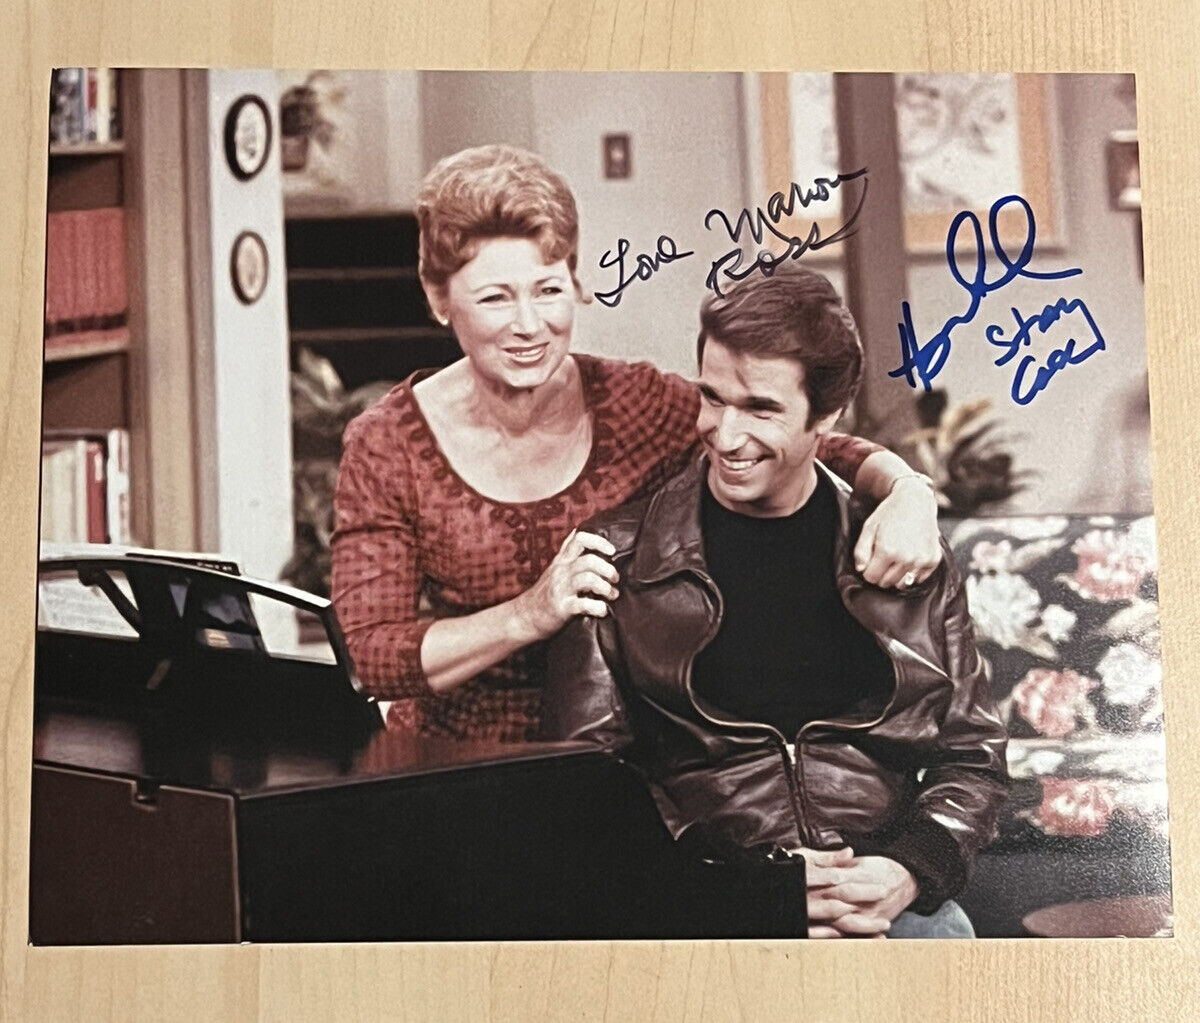 MARION ROSS & HENRY WINKLER HAND SIGNED 8x10 Photo Poster painting AUTOGRAPHED HAPPY DAYS COA